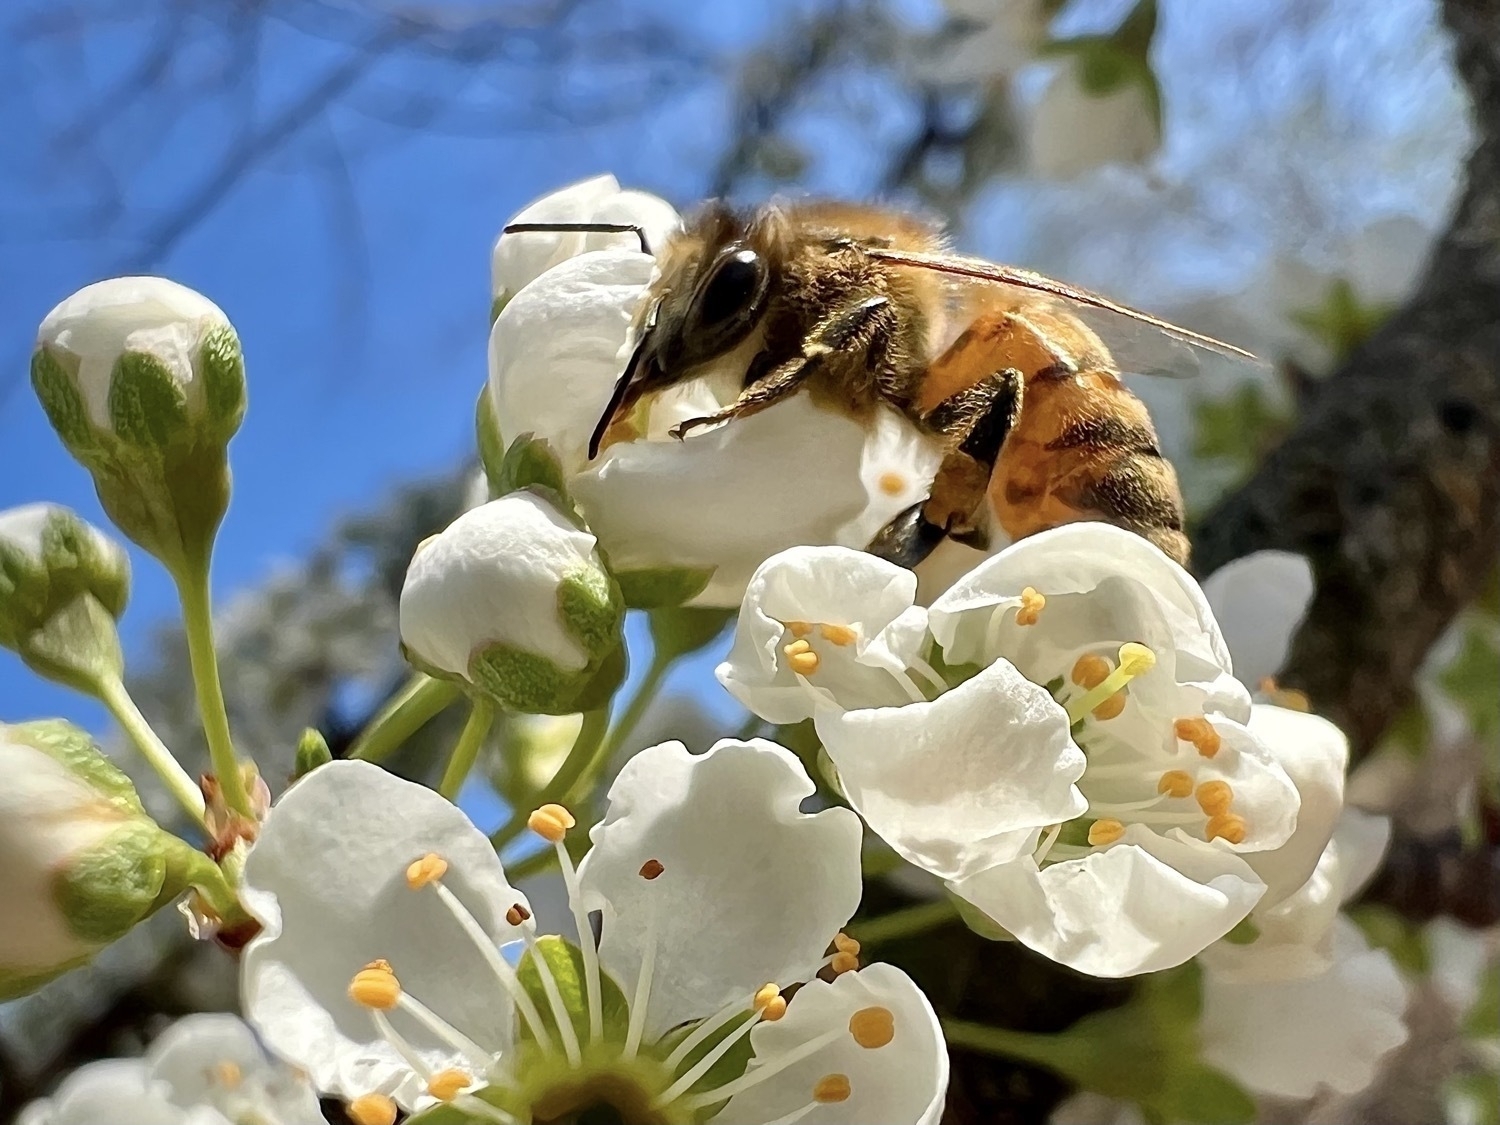 A honeybee is collecting pollen from white plum flowers. A bright blue sky is visible in the background.